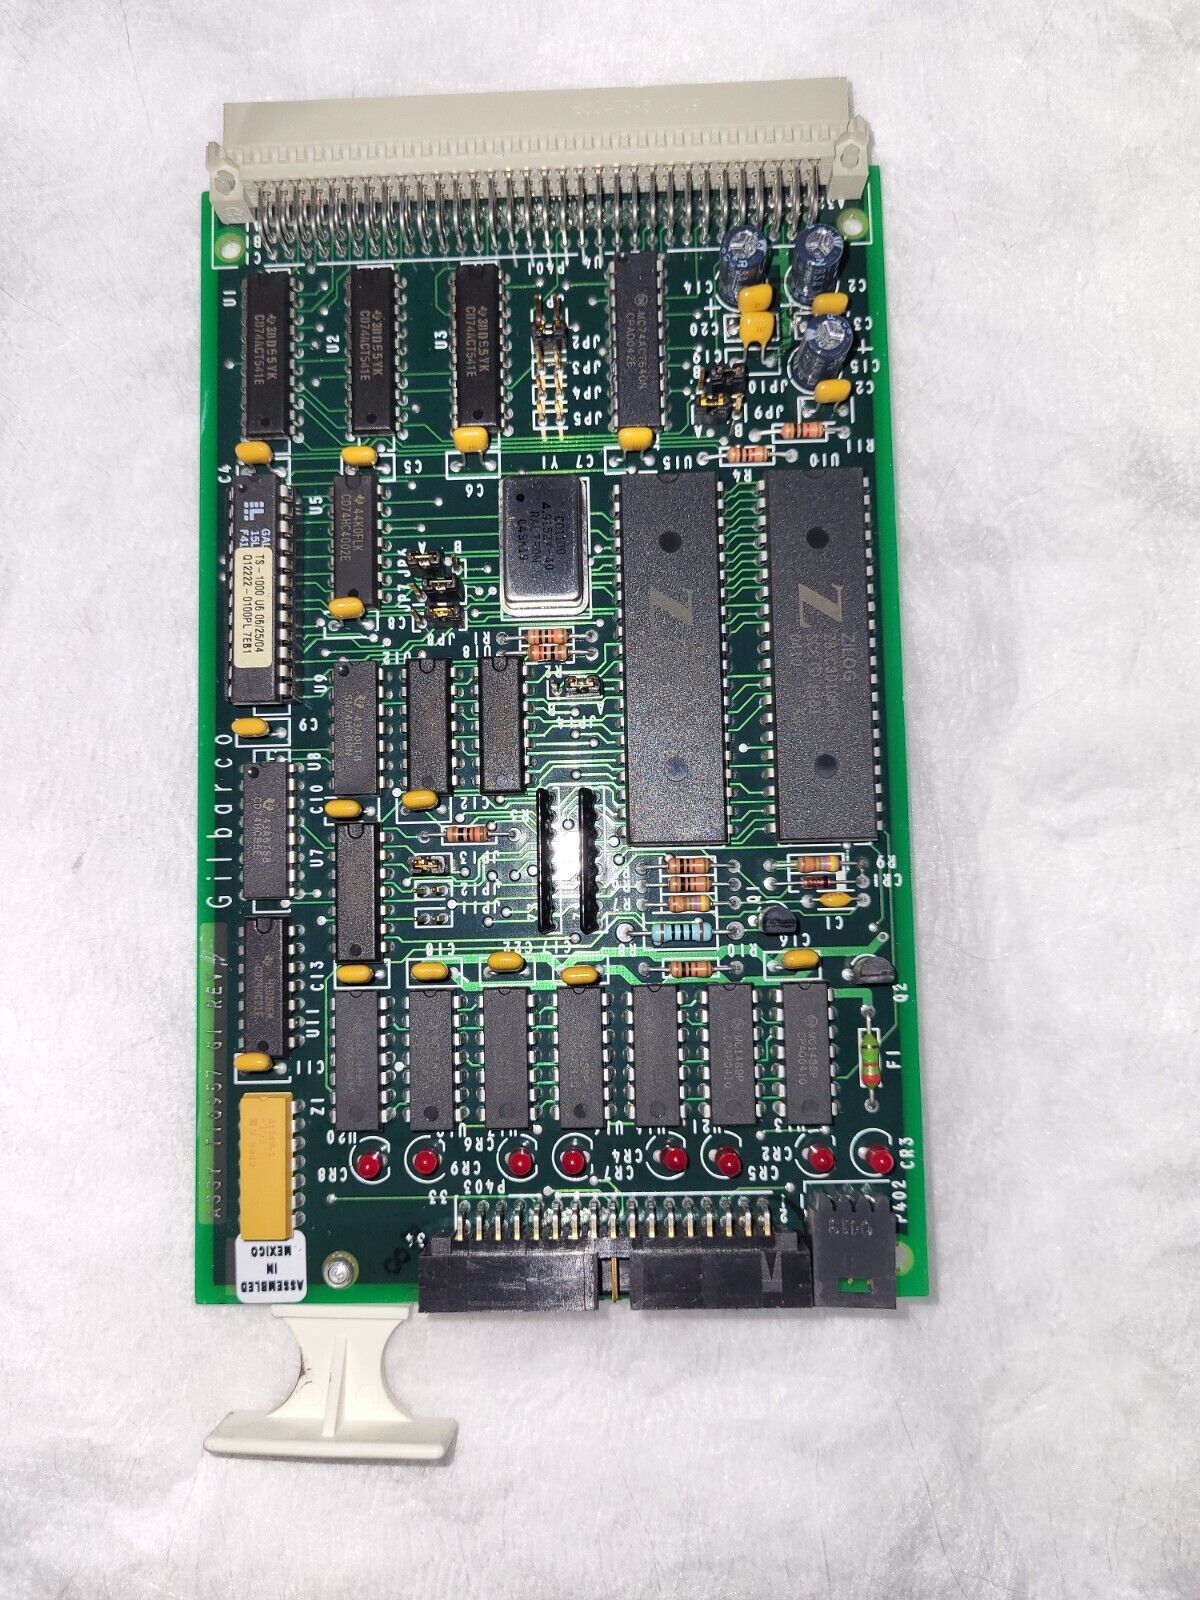 Veeder-Root/Gilbarco TS-1000 / PAM 1000 T16957-G1 PAM I/O Board